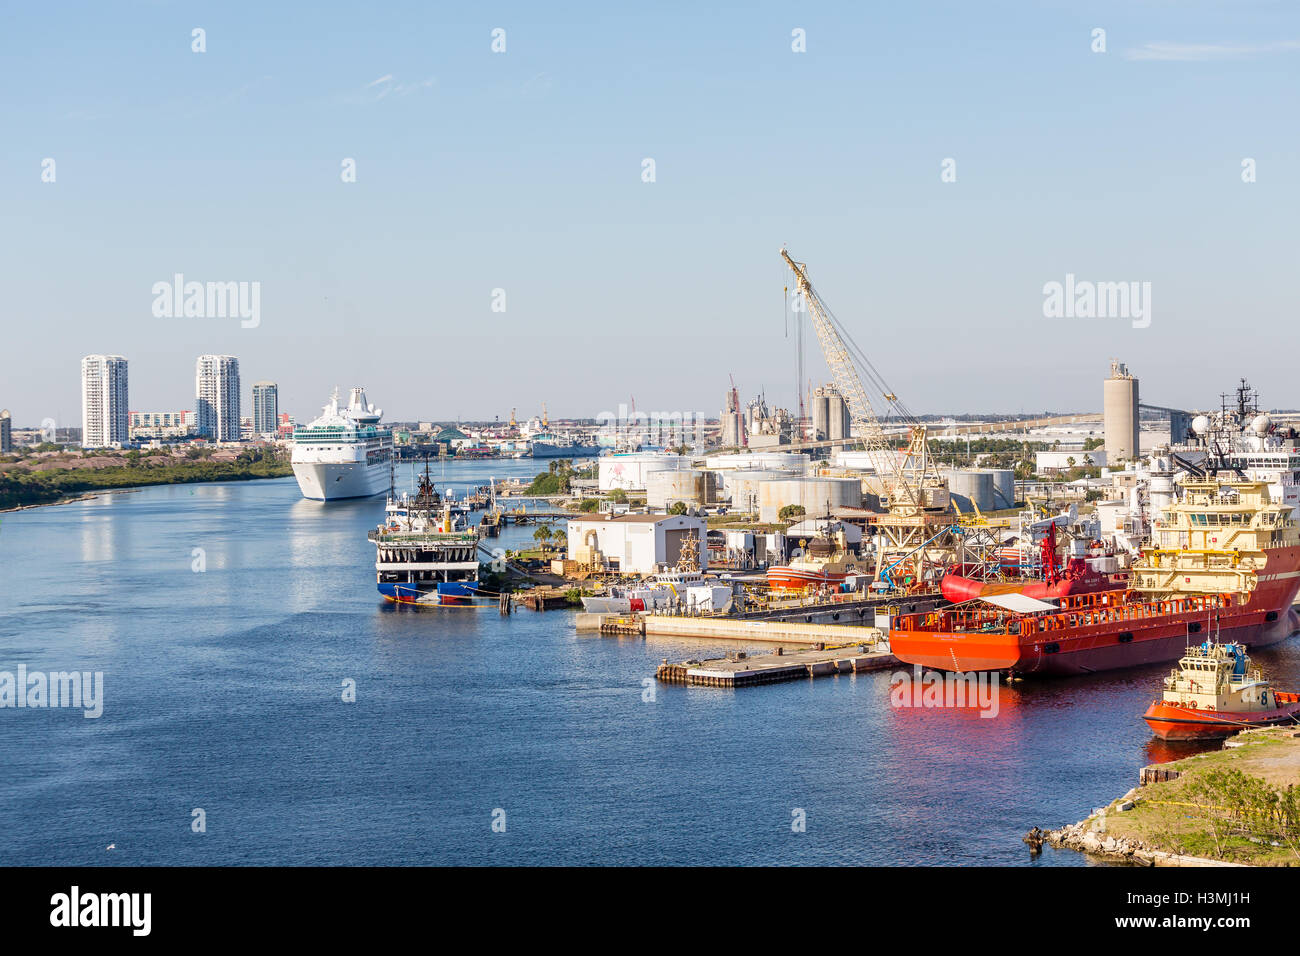 Cruise Ship Sailing Past Industrial Port near Tampa Stock Photo